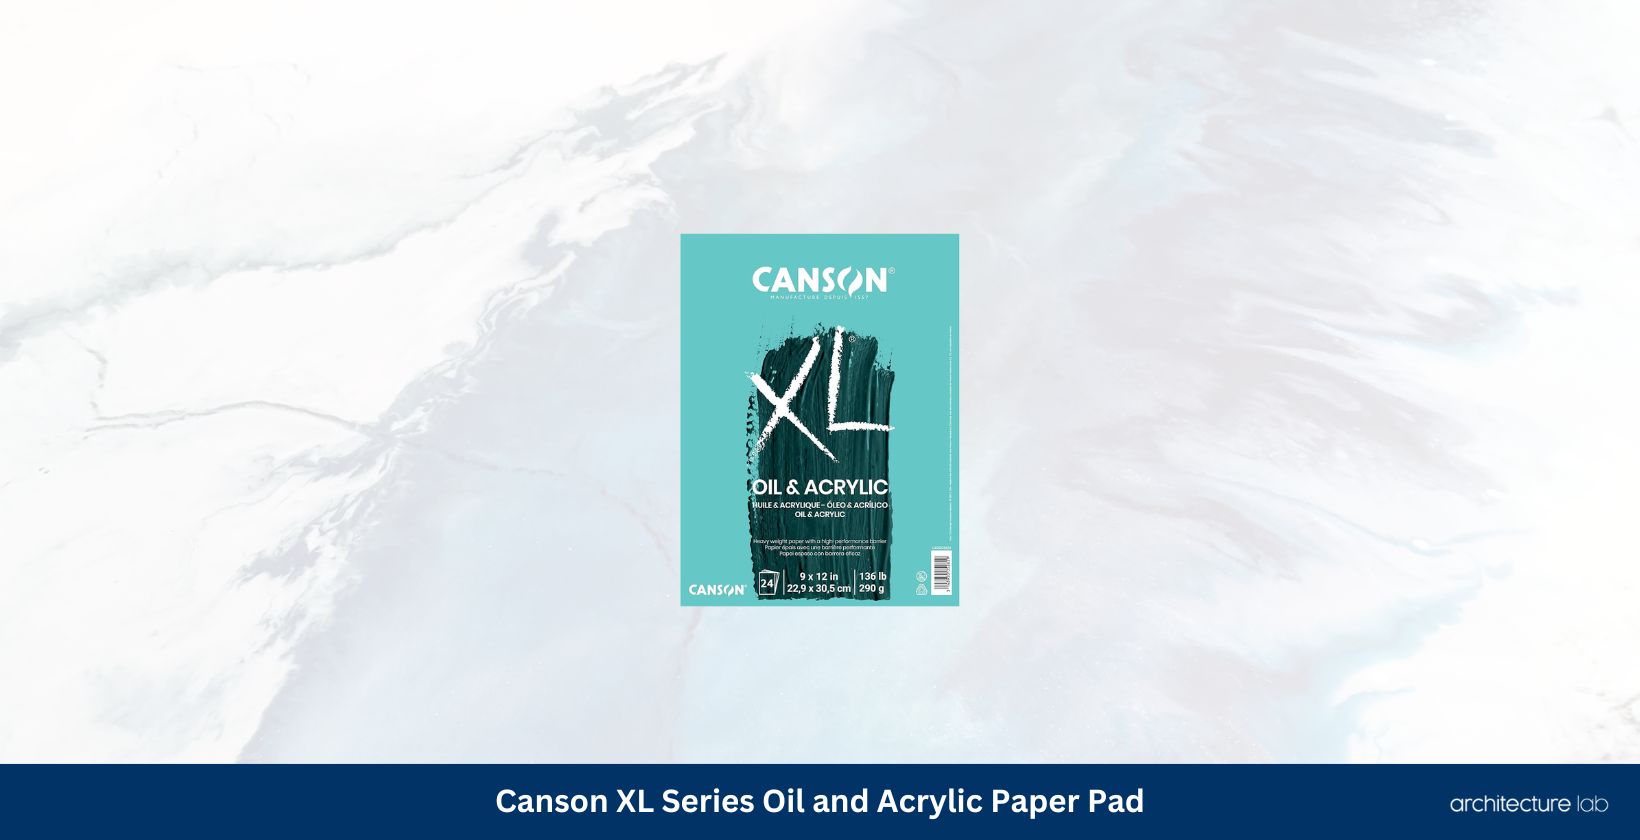 Canson xl series oil and acrylic paper pad